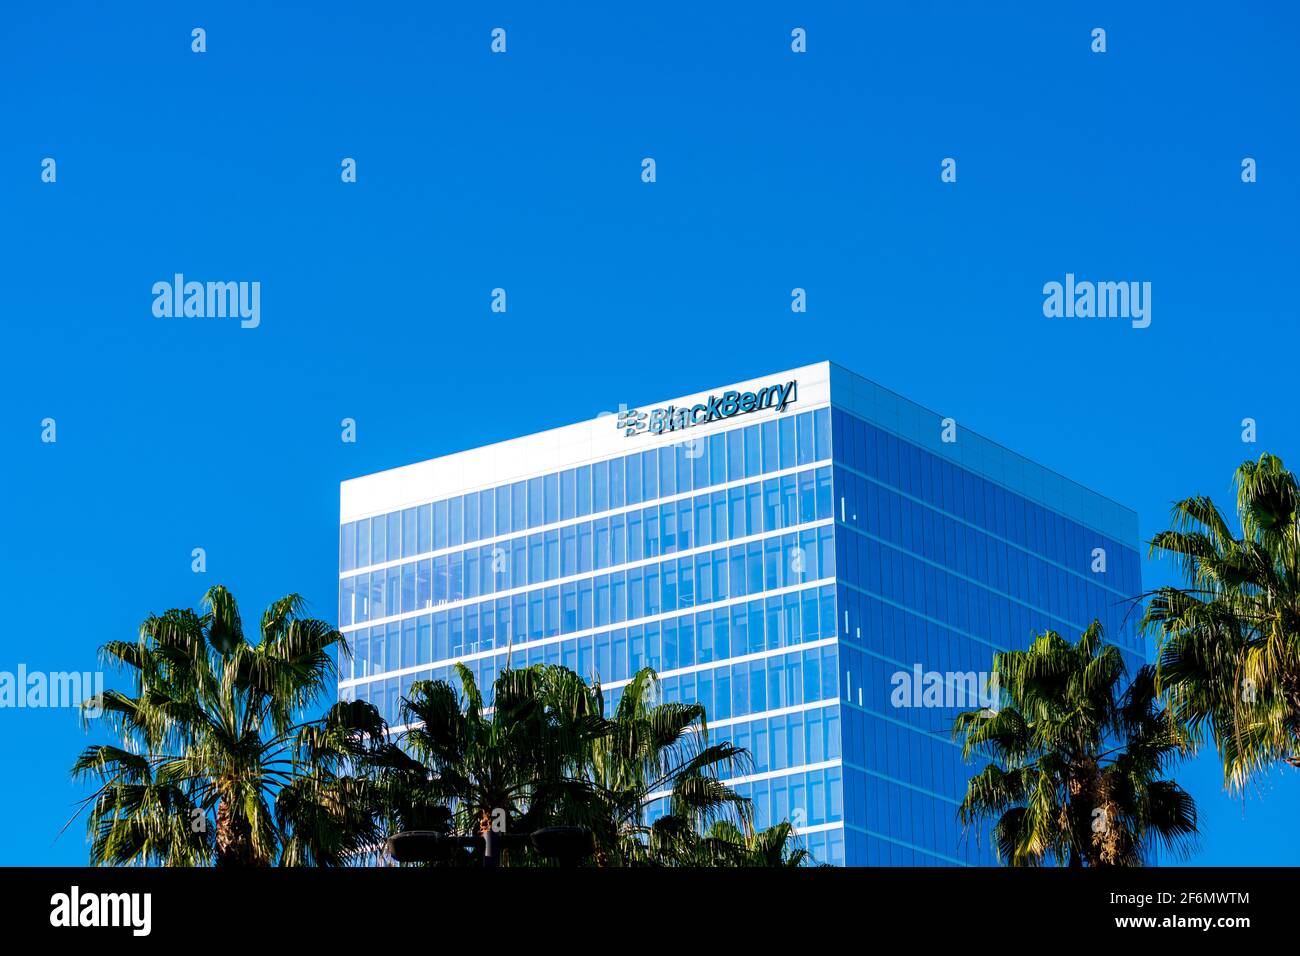 BlackBerry Limited campus exterior. BlackBerry Ltd, former developer of the BlackBerry smartphones, specializes in enterprise software and IOT - Irvin Stock Photo